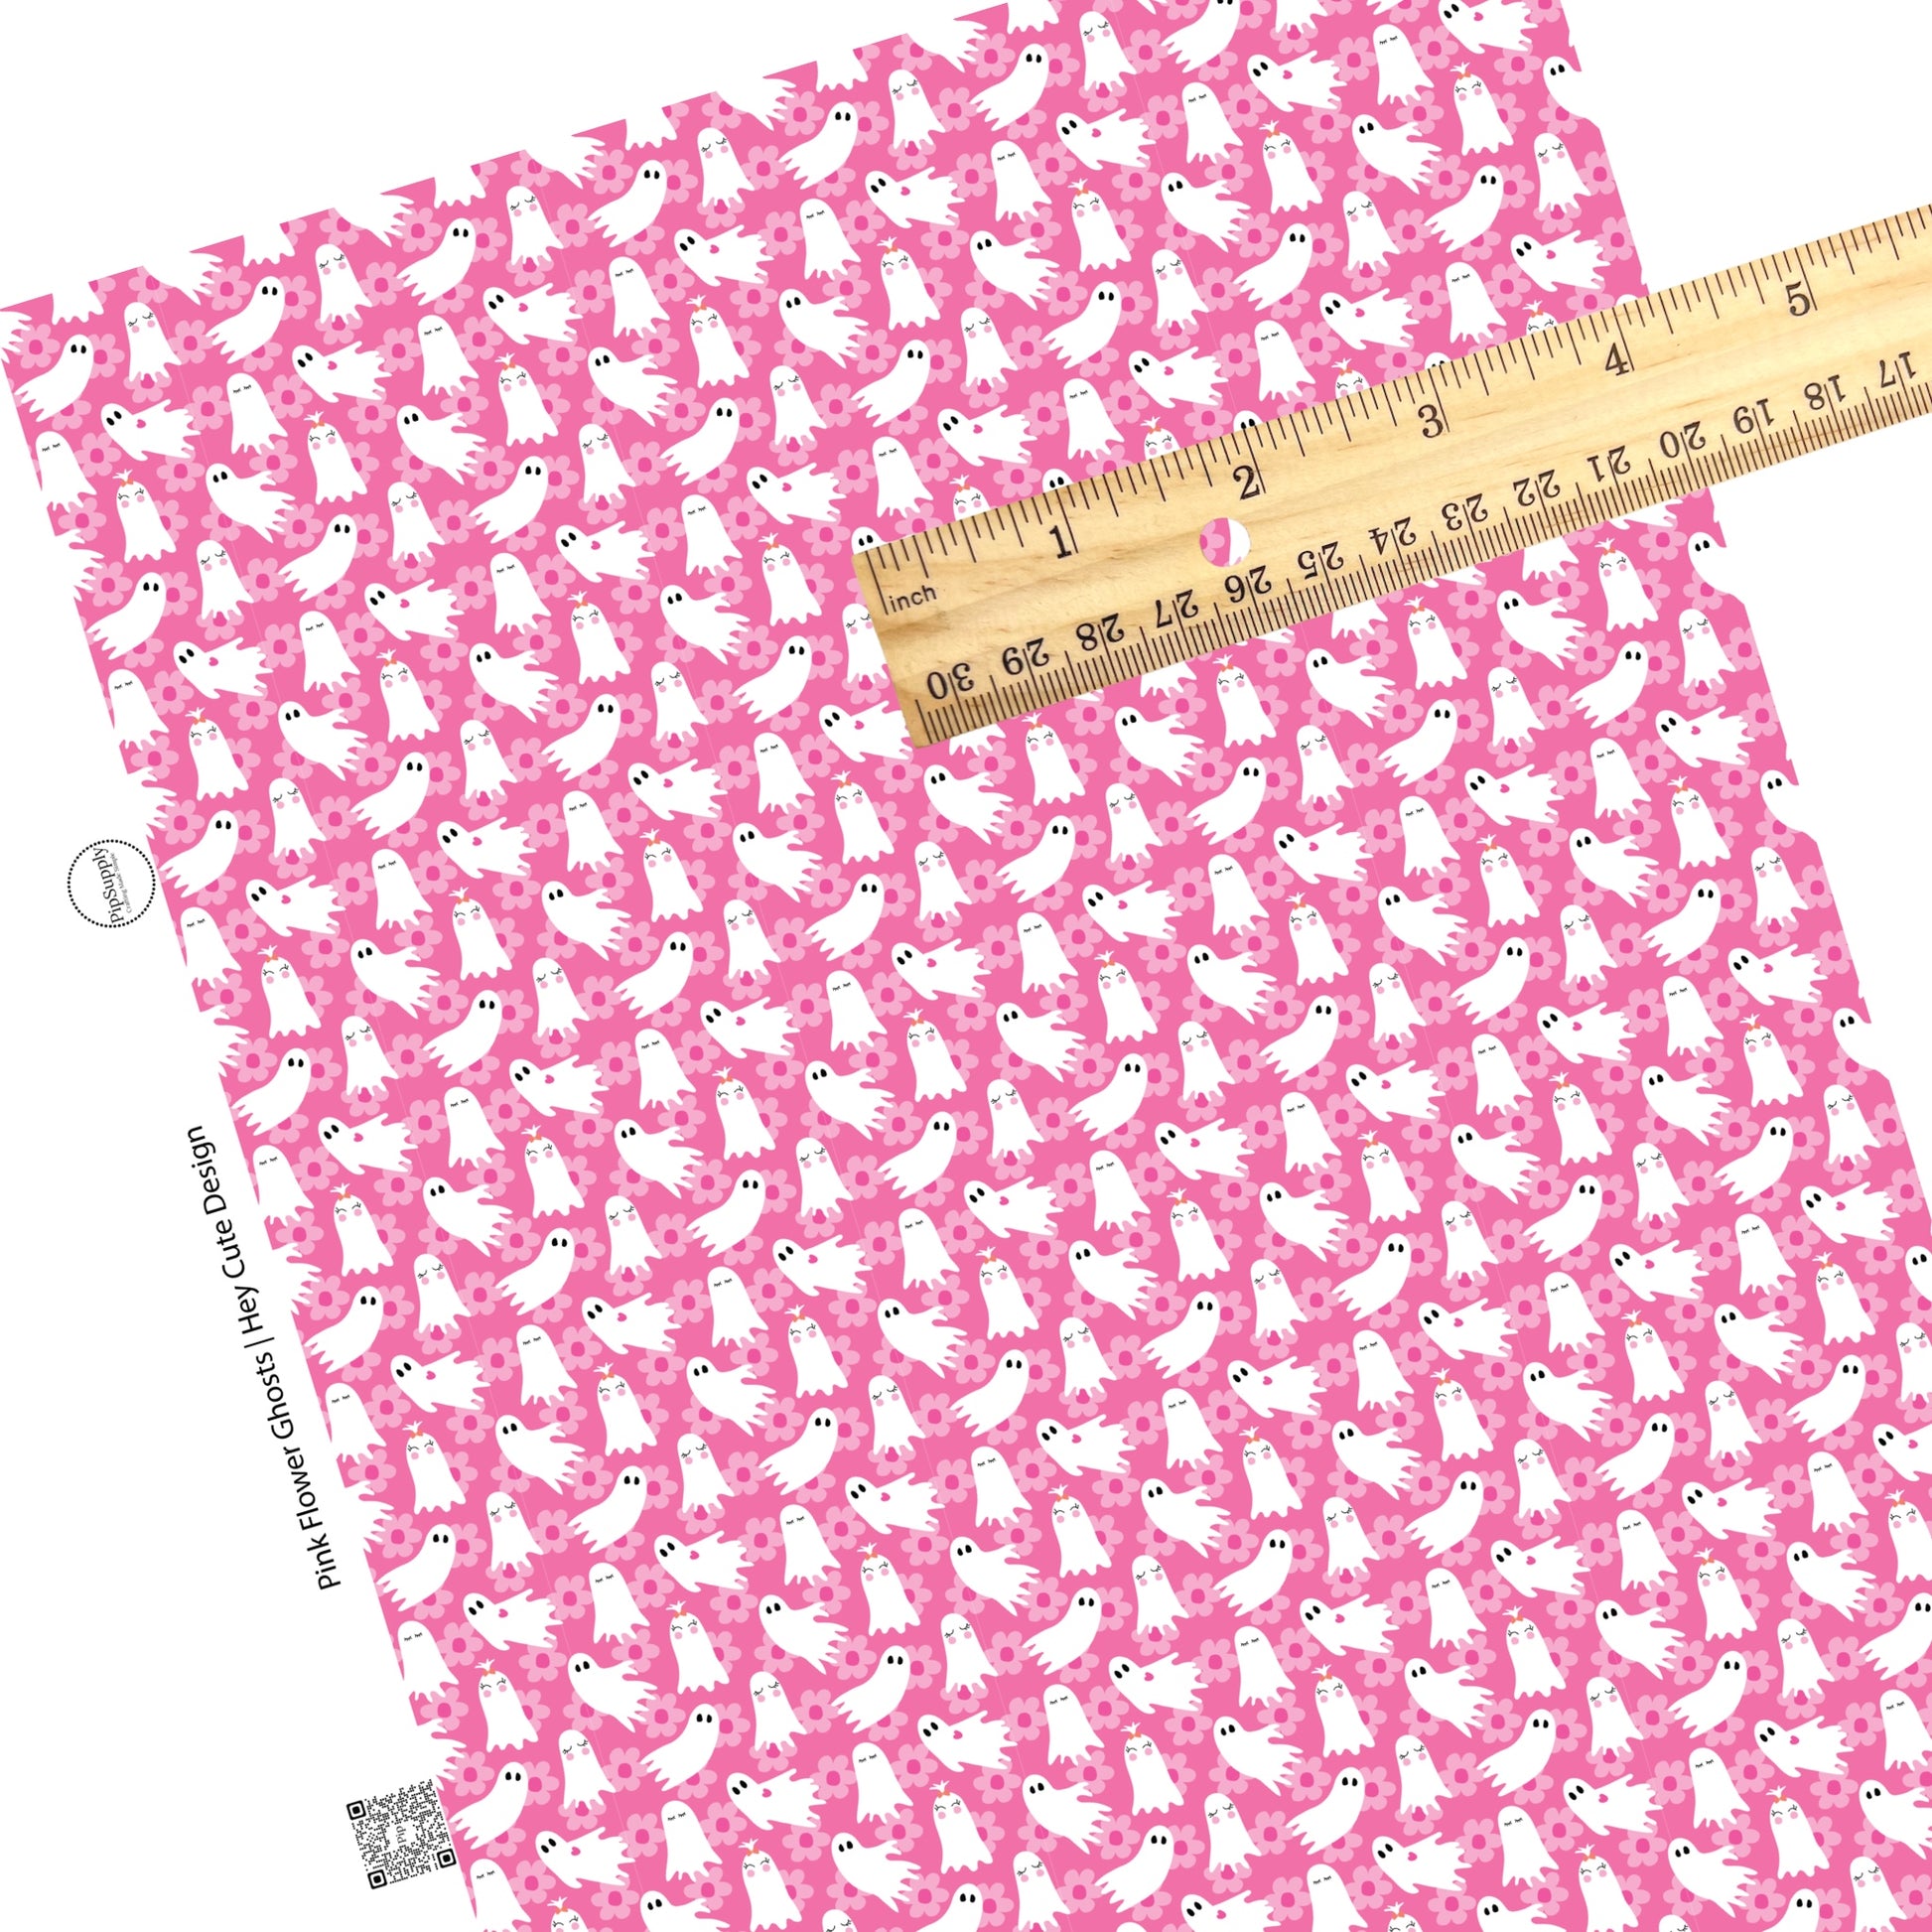 Candy Dots Custom Glitter Leather Sheets Flowers Printed Faux